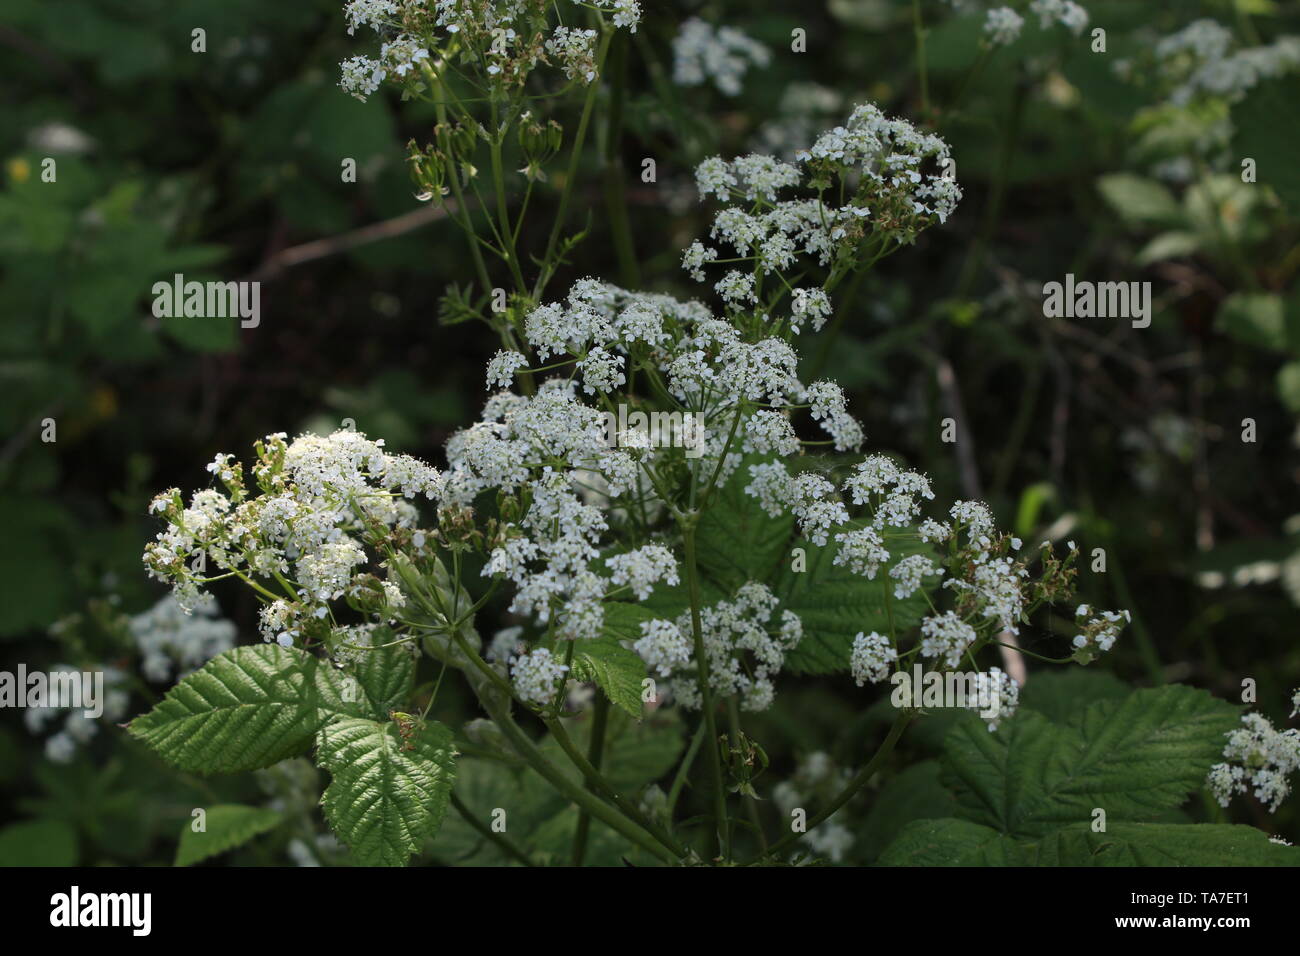 Beautiful white flowers growing among the weeds Stock Photo